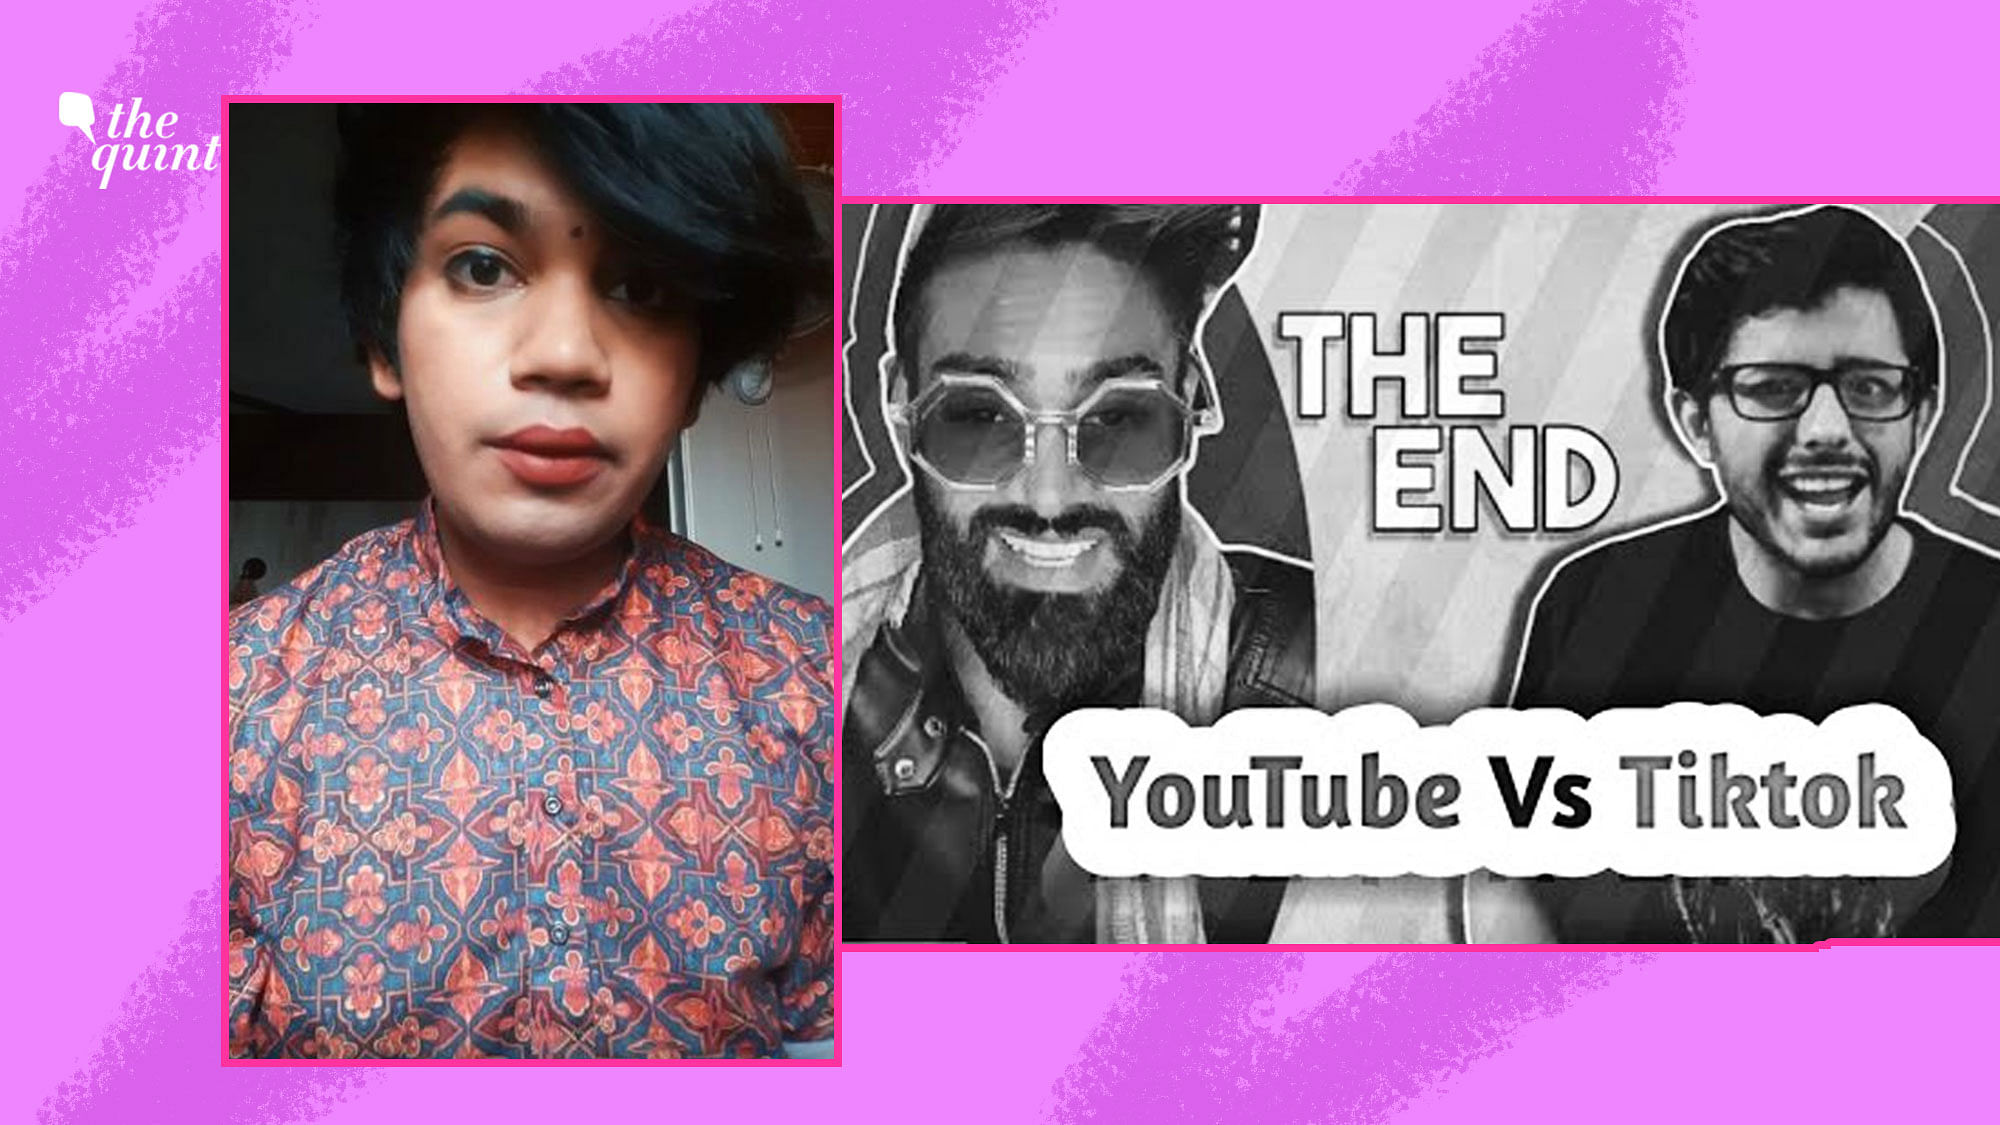 Queer Rights Activist, Rishi Raj Vyas calls out YouTuber Carryminati for his latest queerphobic video.